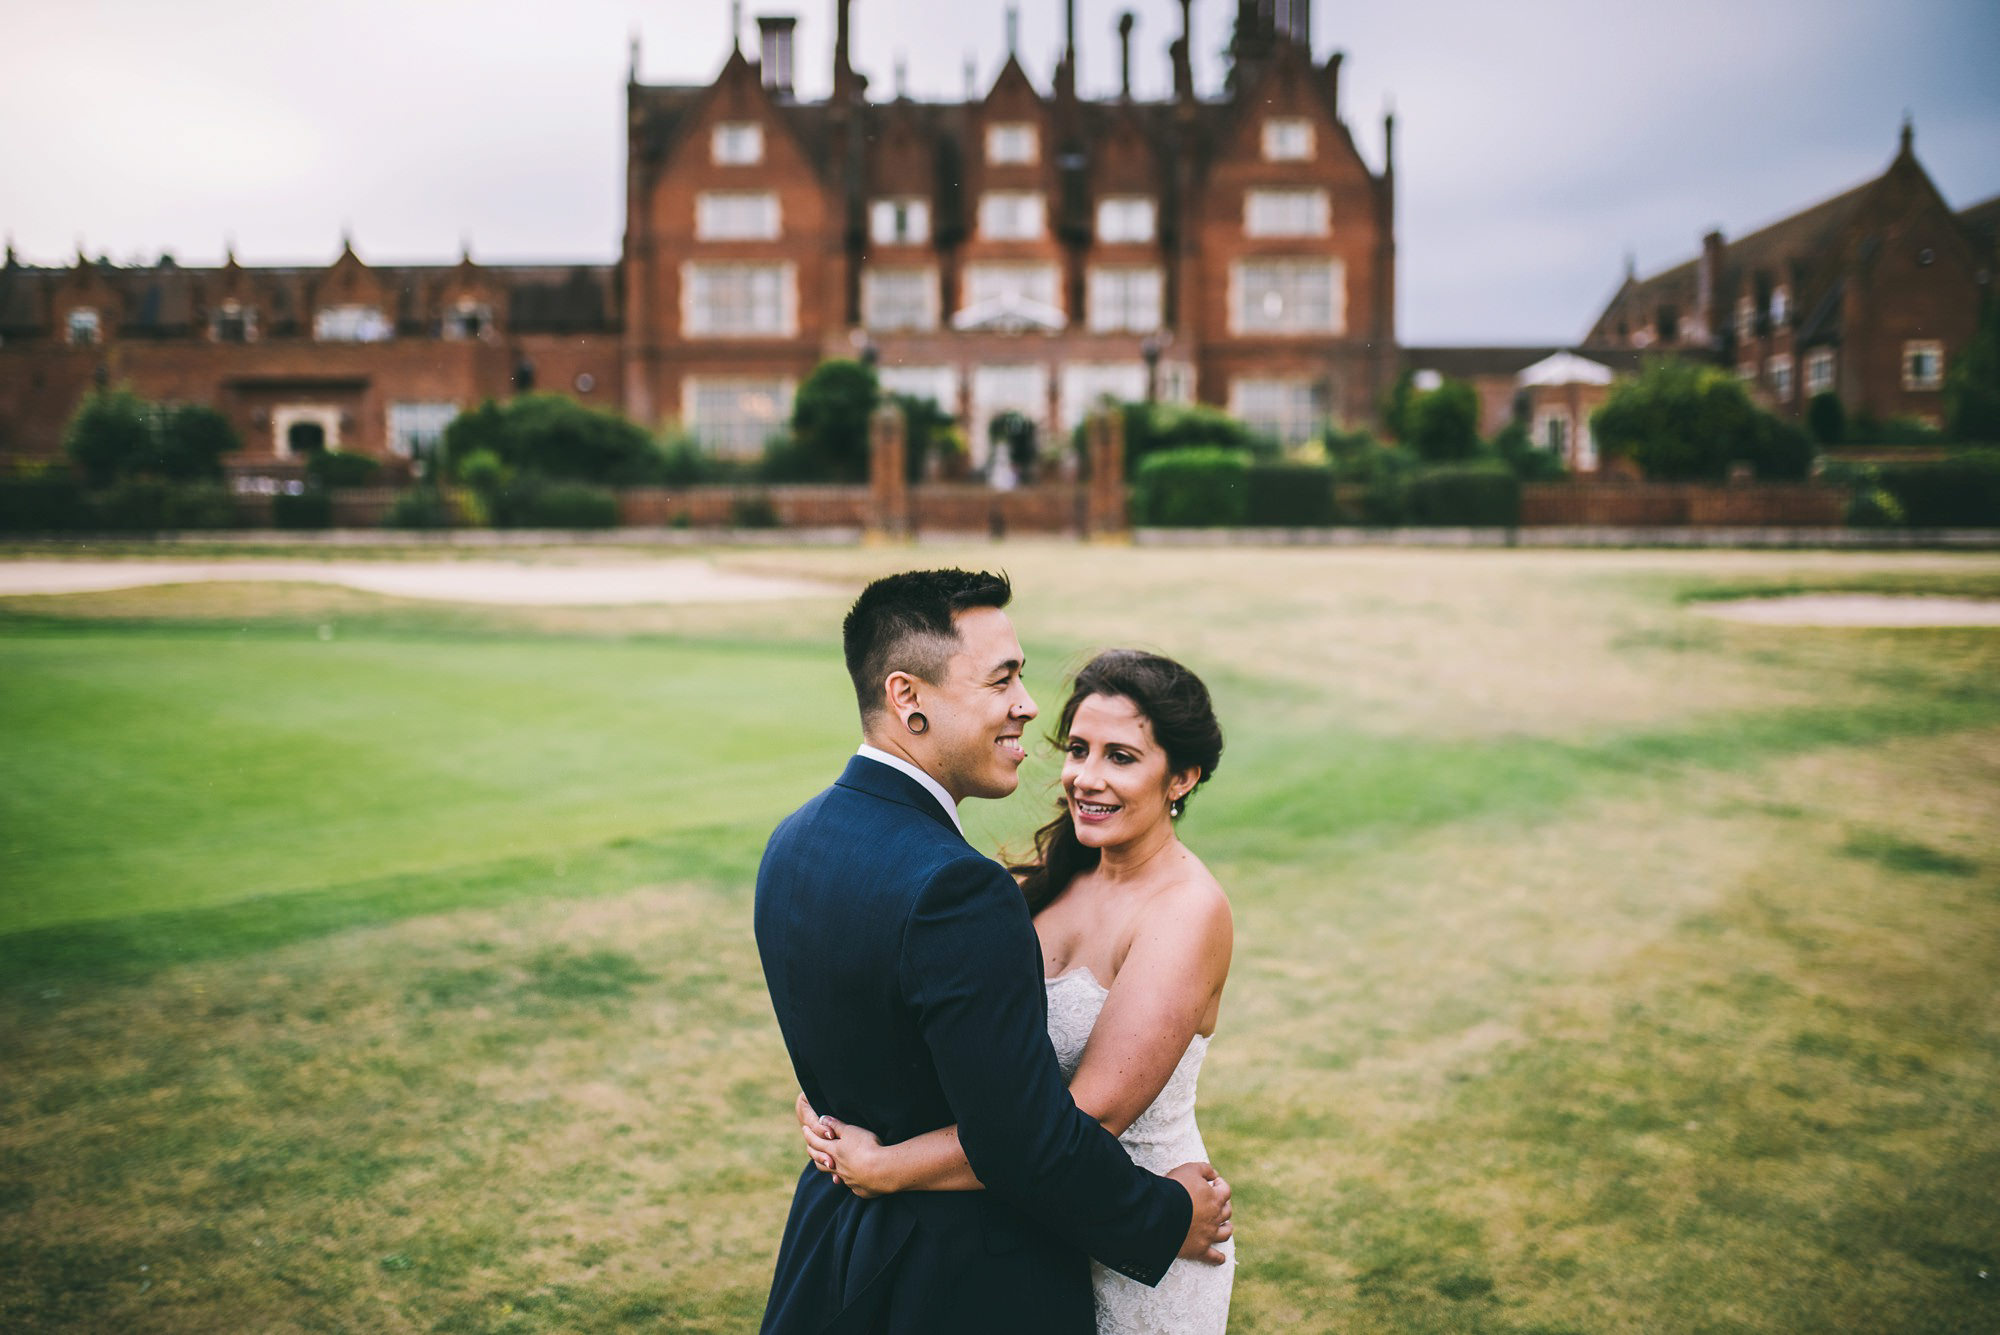 dunston-hall-wedding-in-norwich-james-powell-photography-001